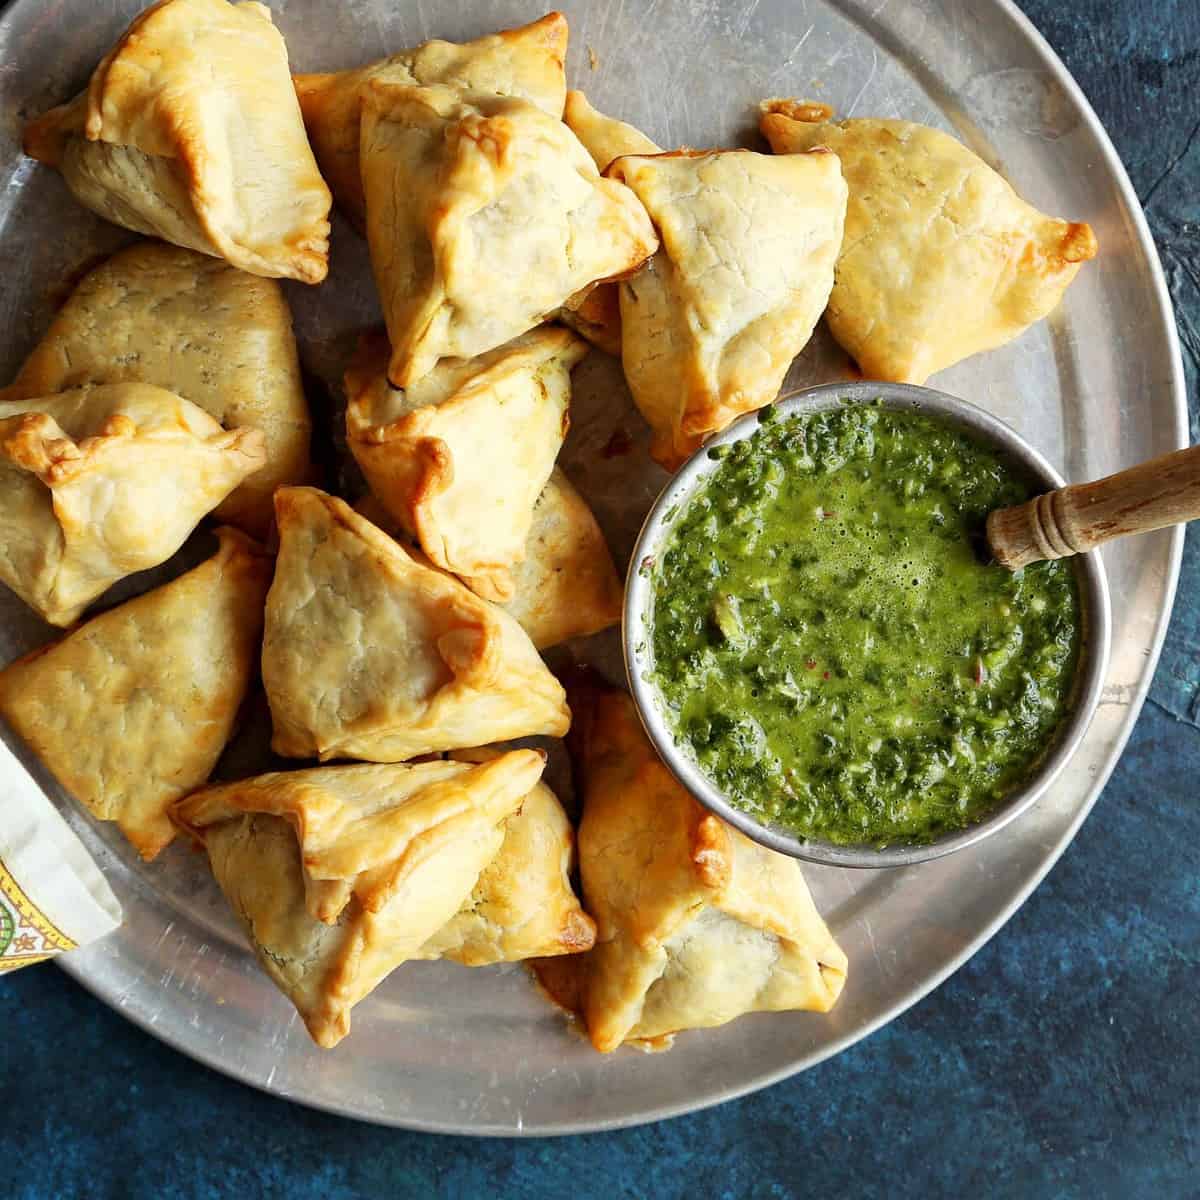  Fragrant spiced potato and pea filling wrapped in a perfectly made pastry.